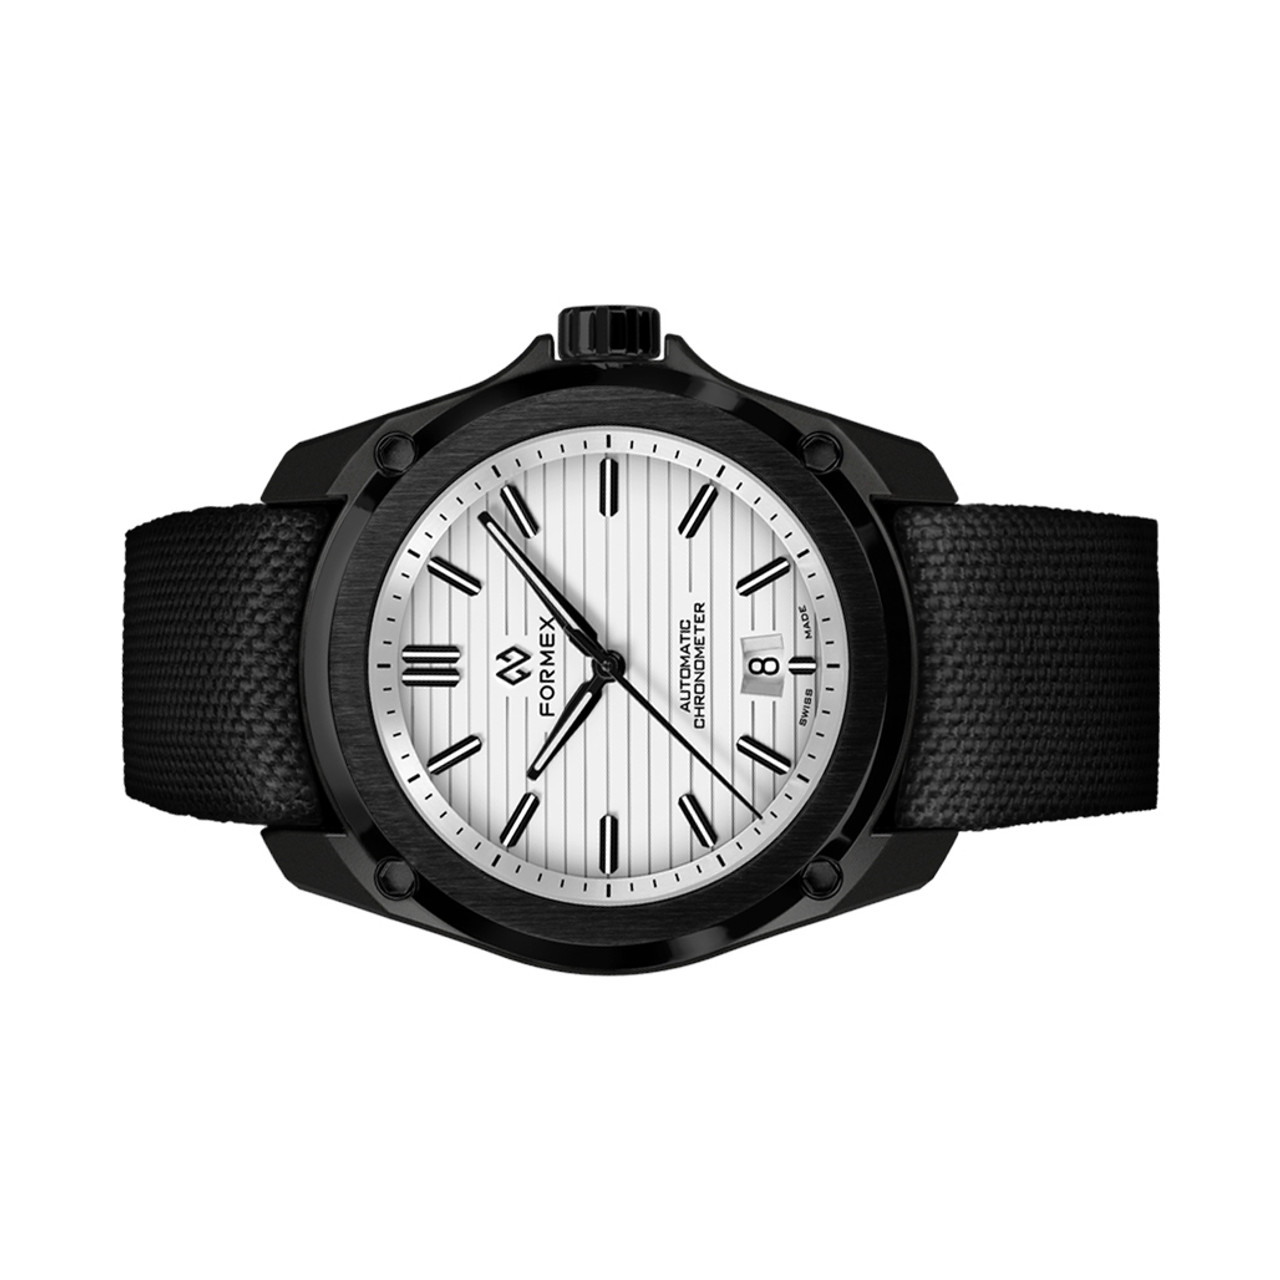 Formex Essence Leggera FortyOne (41mm) COSC Automatic Carbon Case Watch  with Arctic White Dial #0331.4.6311.811